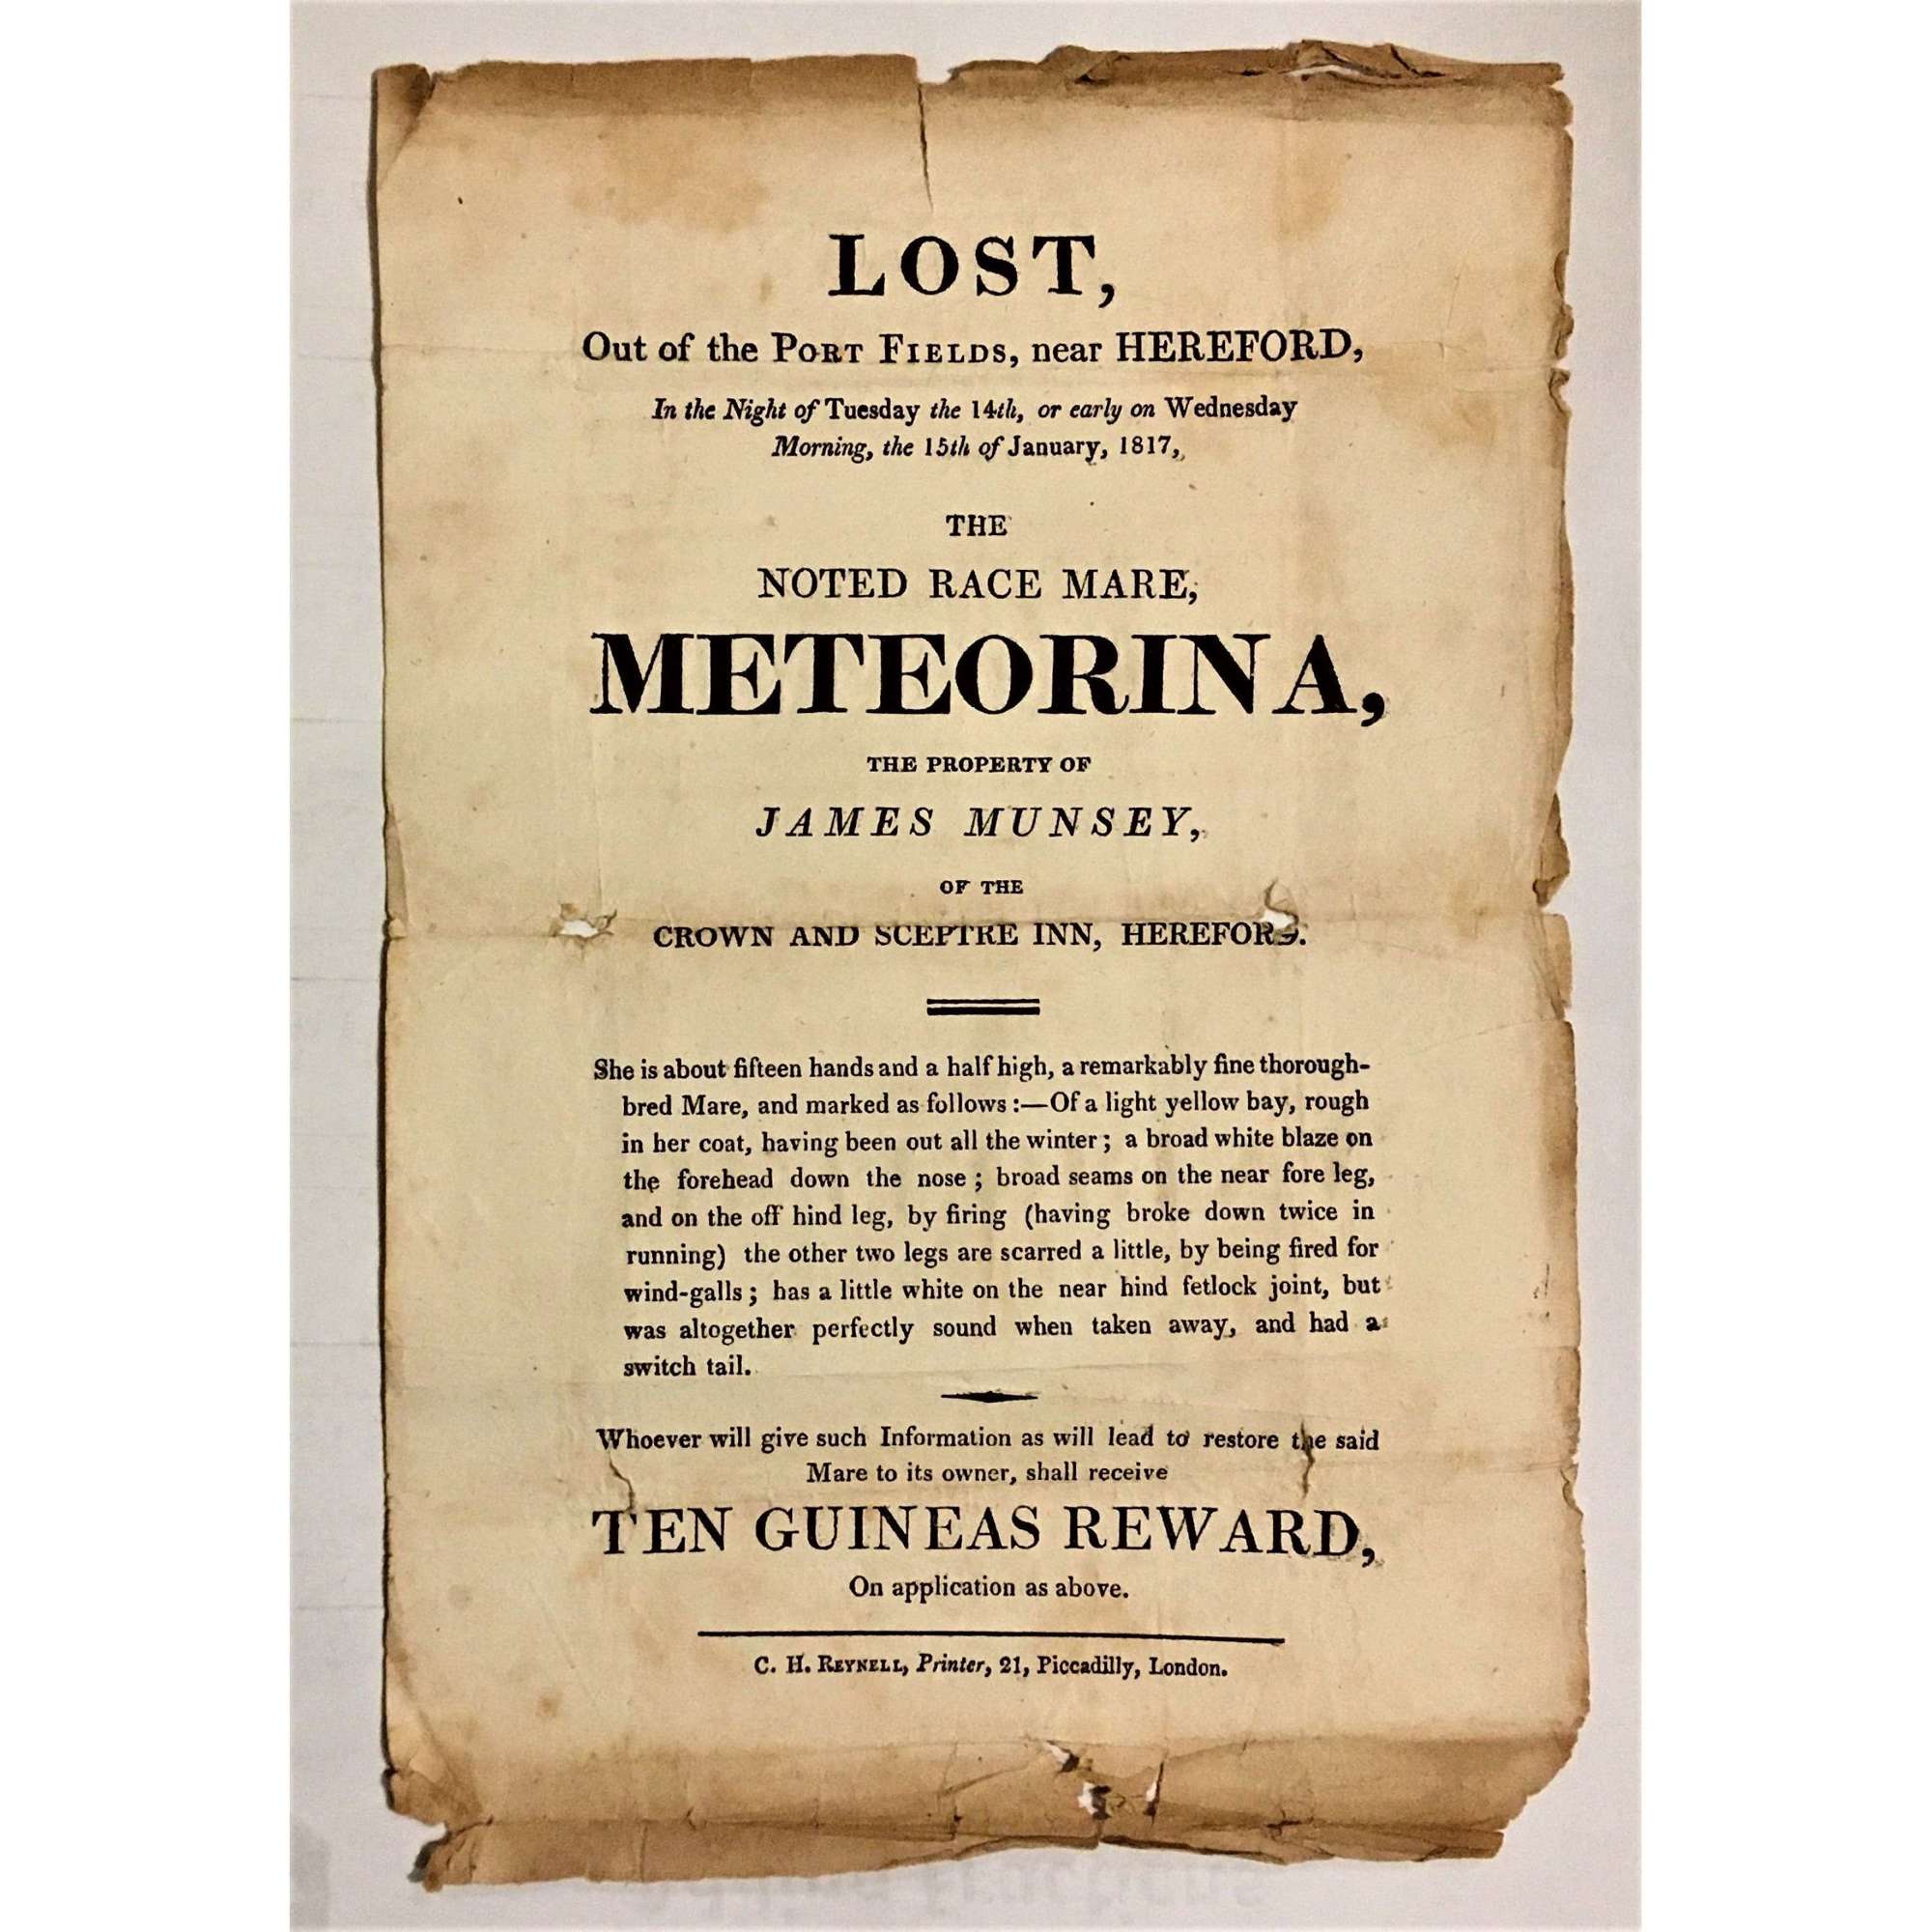 19th Century letterpress handbill or small poster for a missing horse